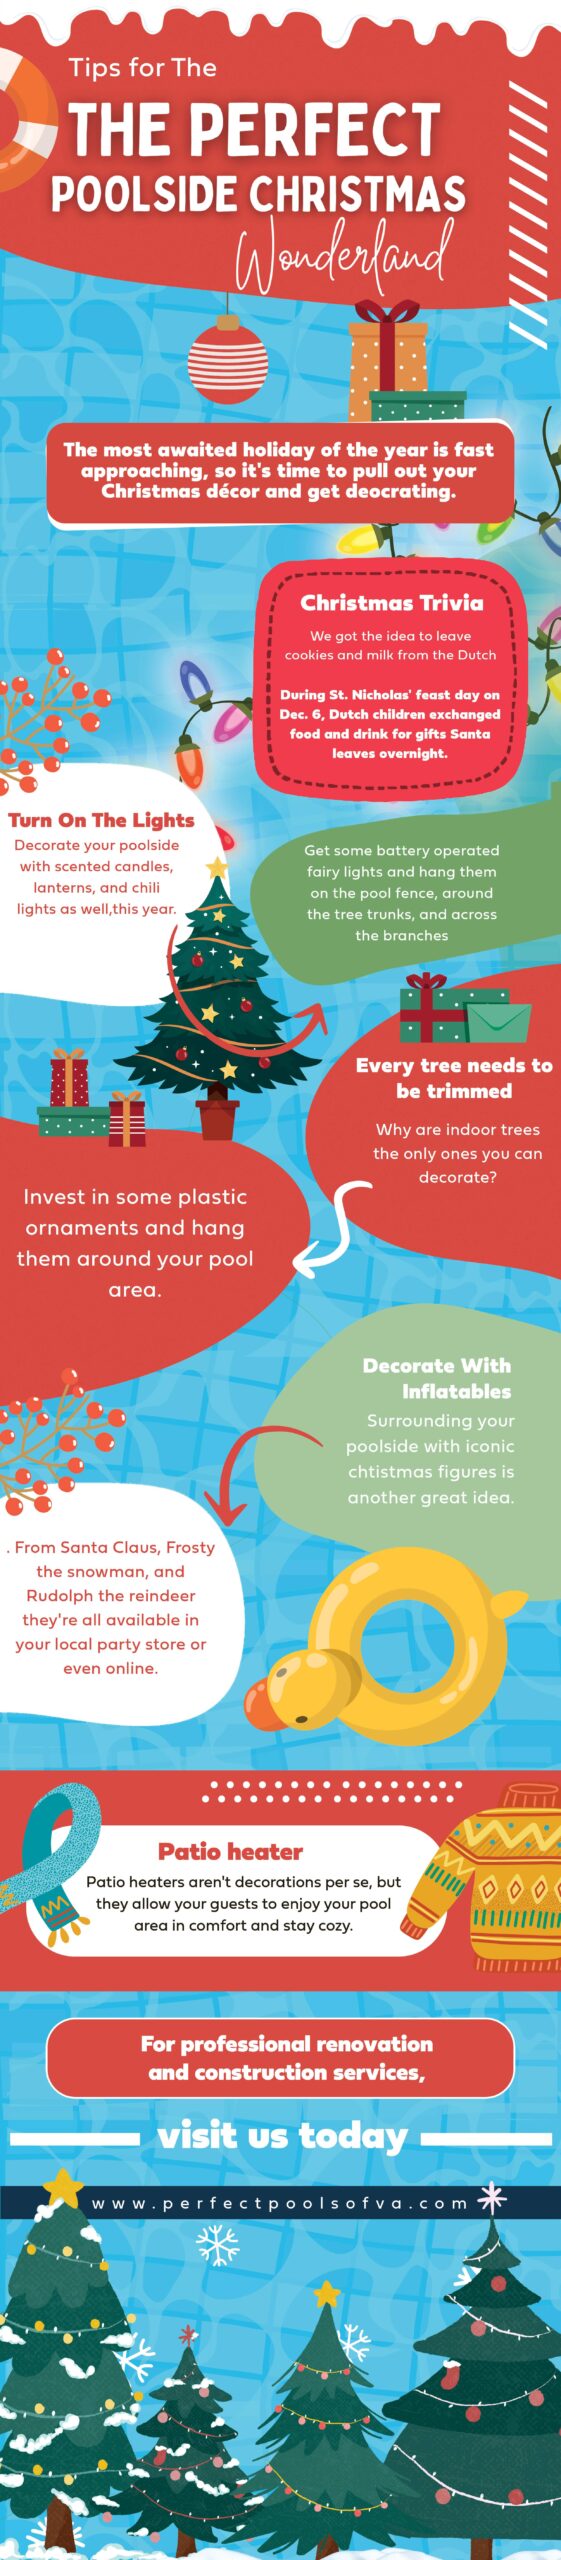 The Perfect Poolside Christmas - Infograph